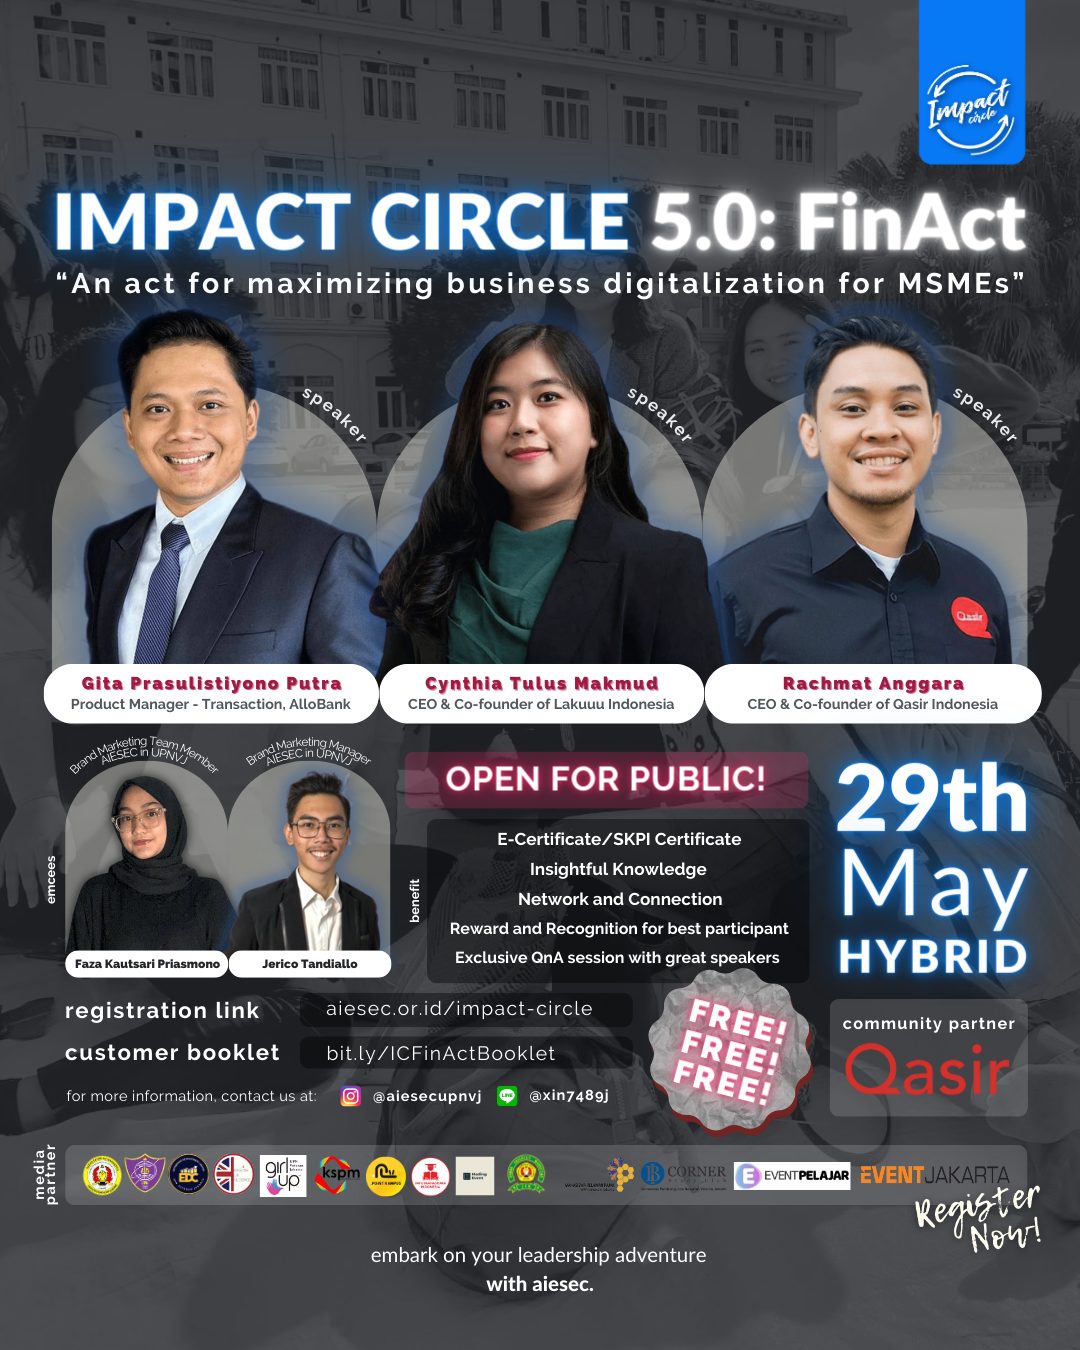 Impact Circle 6.0 - AIESEC in UIN Jakarta